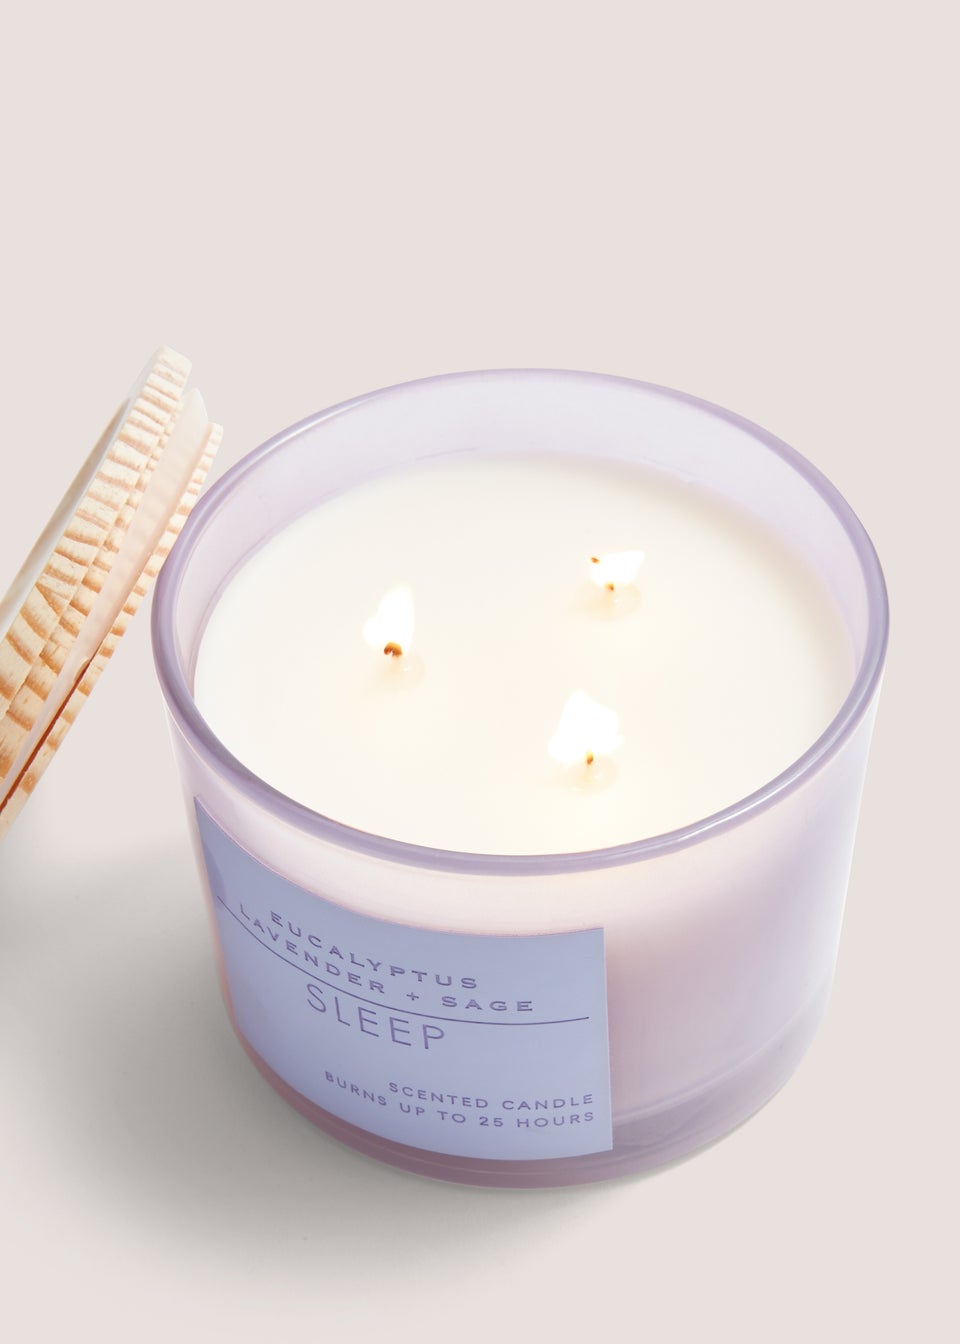 Sleep Spa Scented Candle